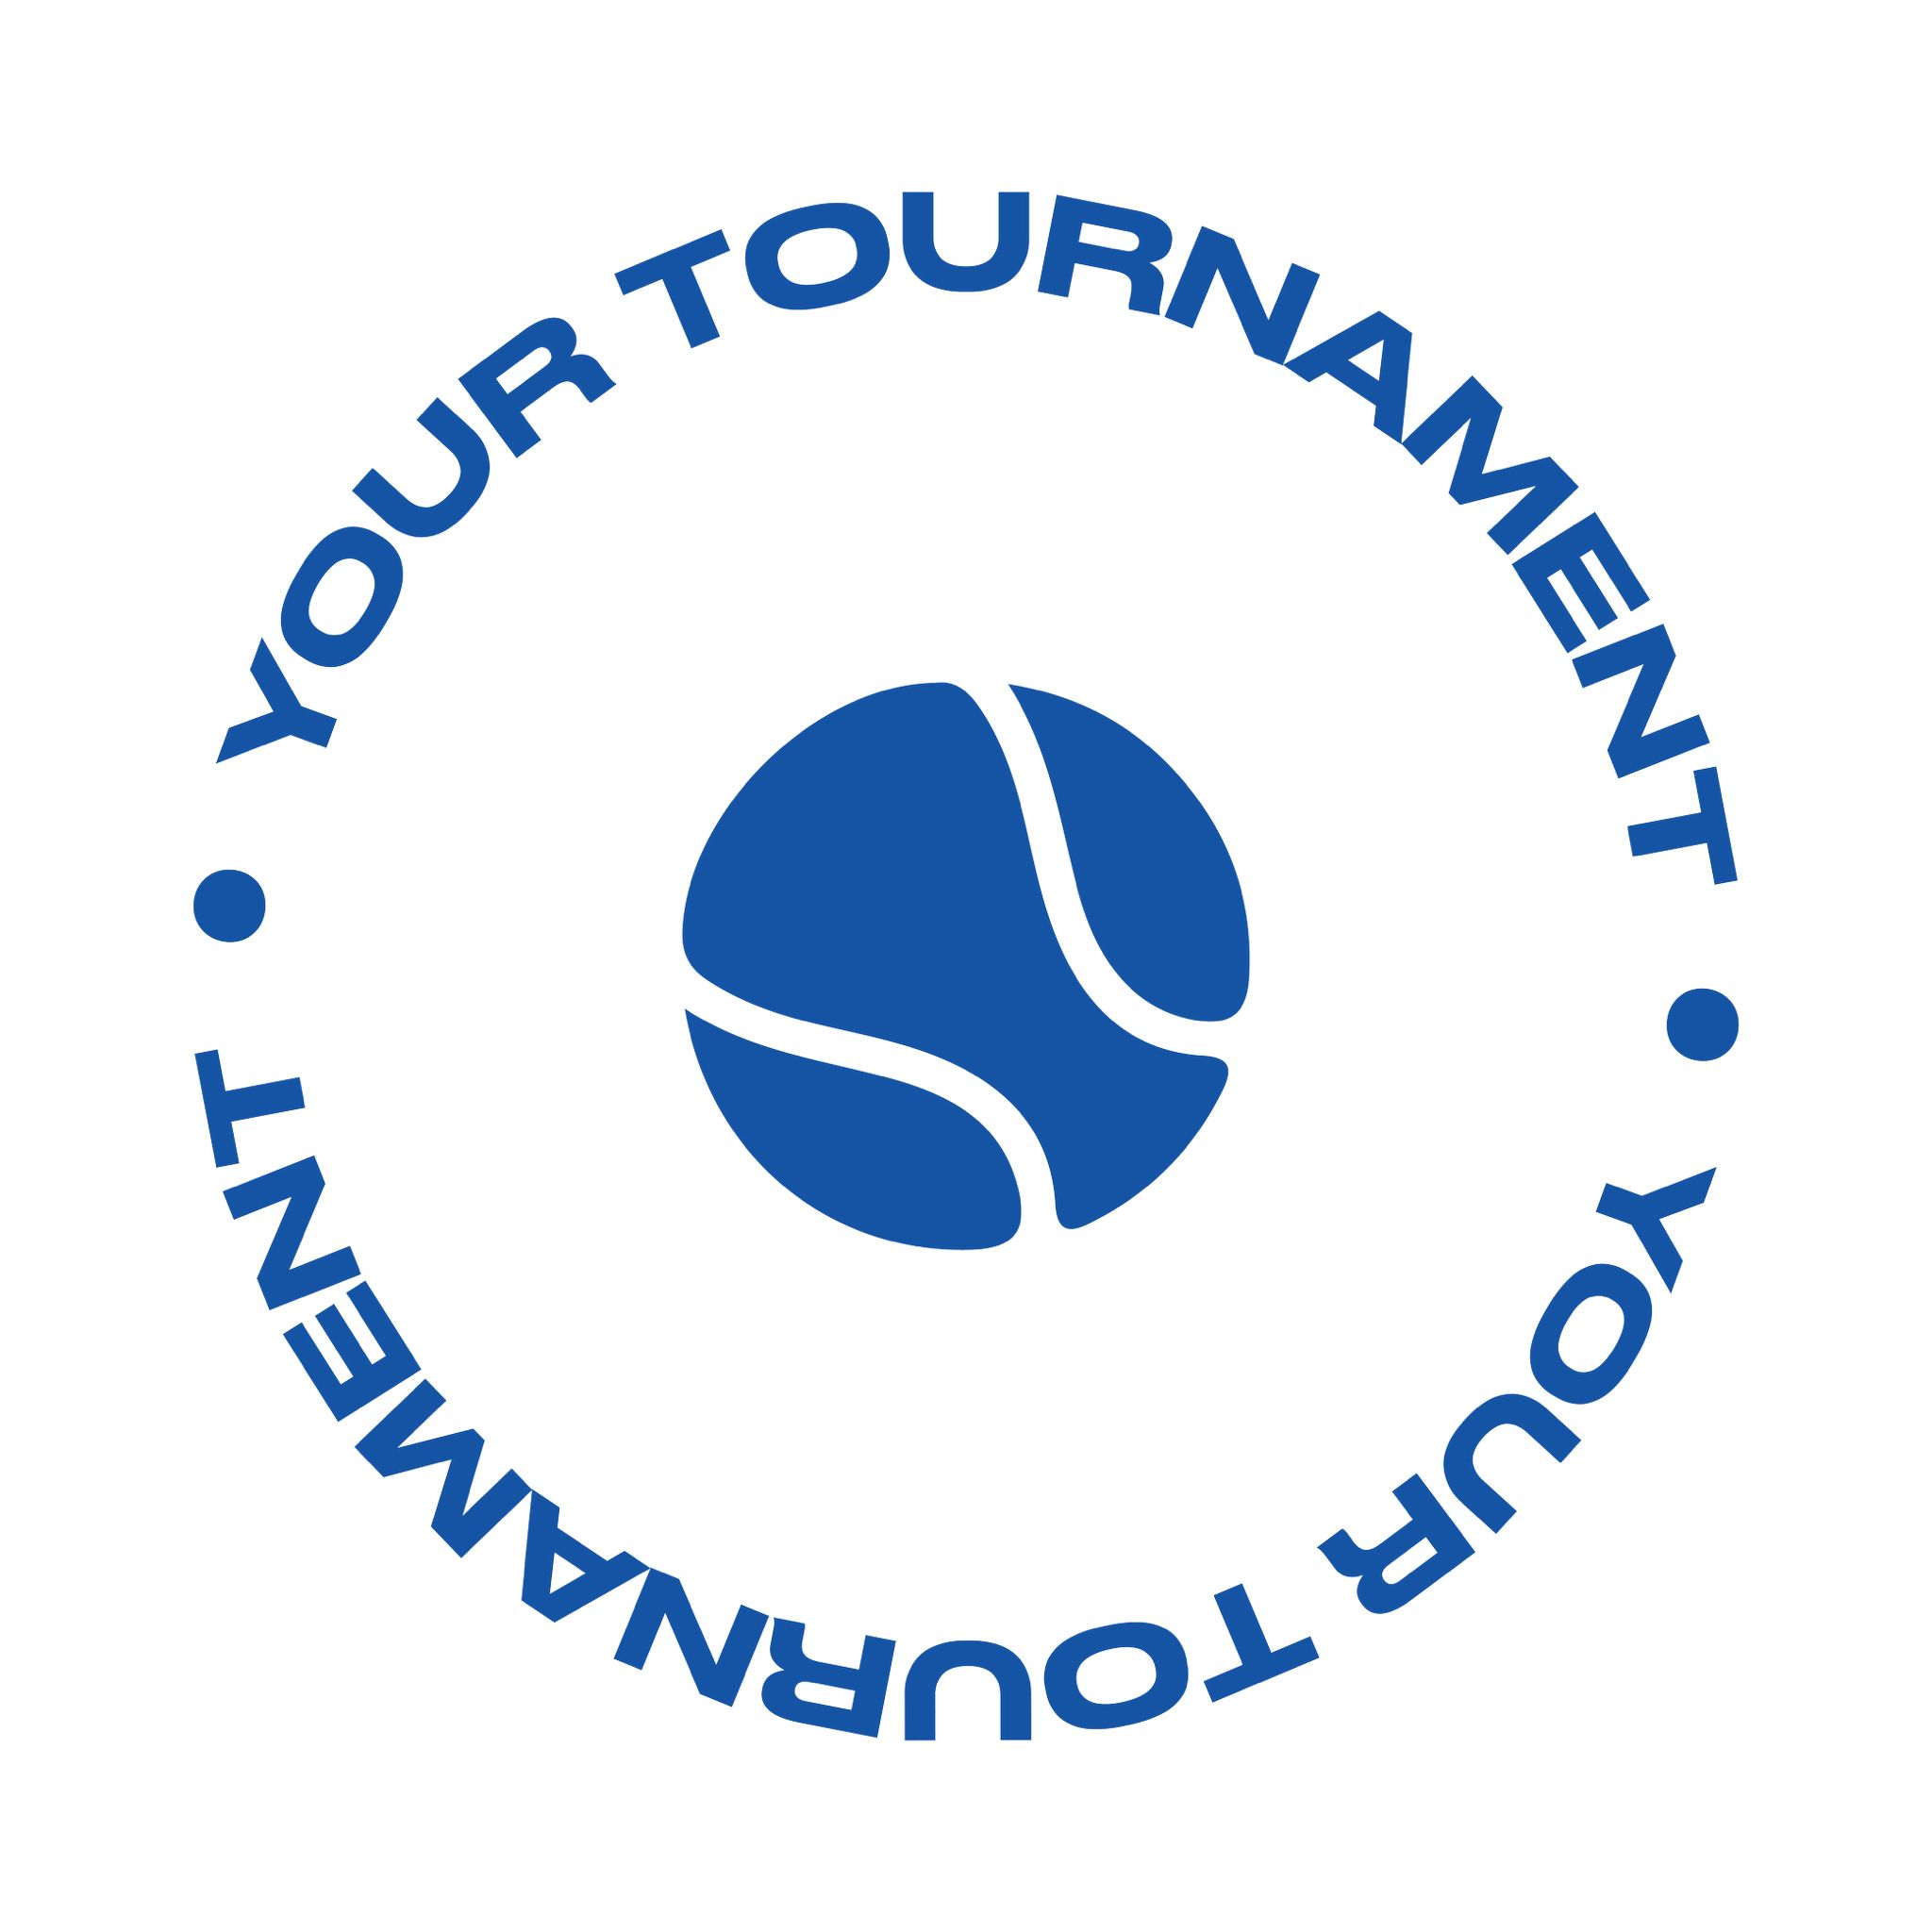 Your Tournament